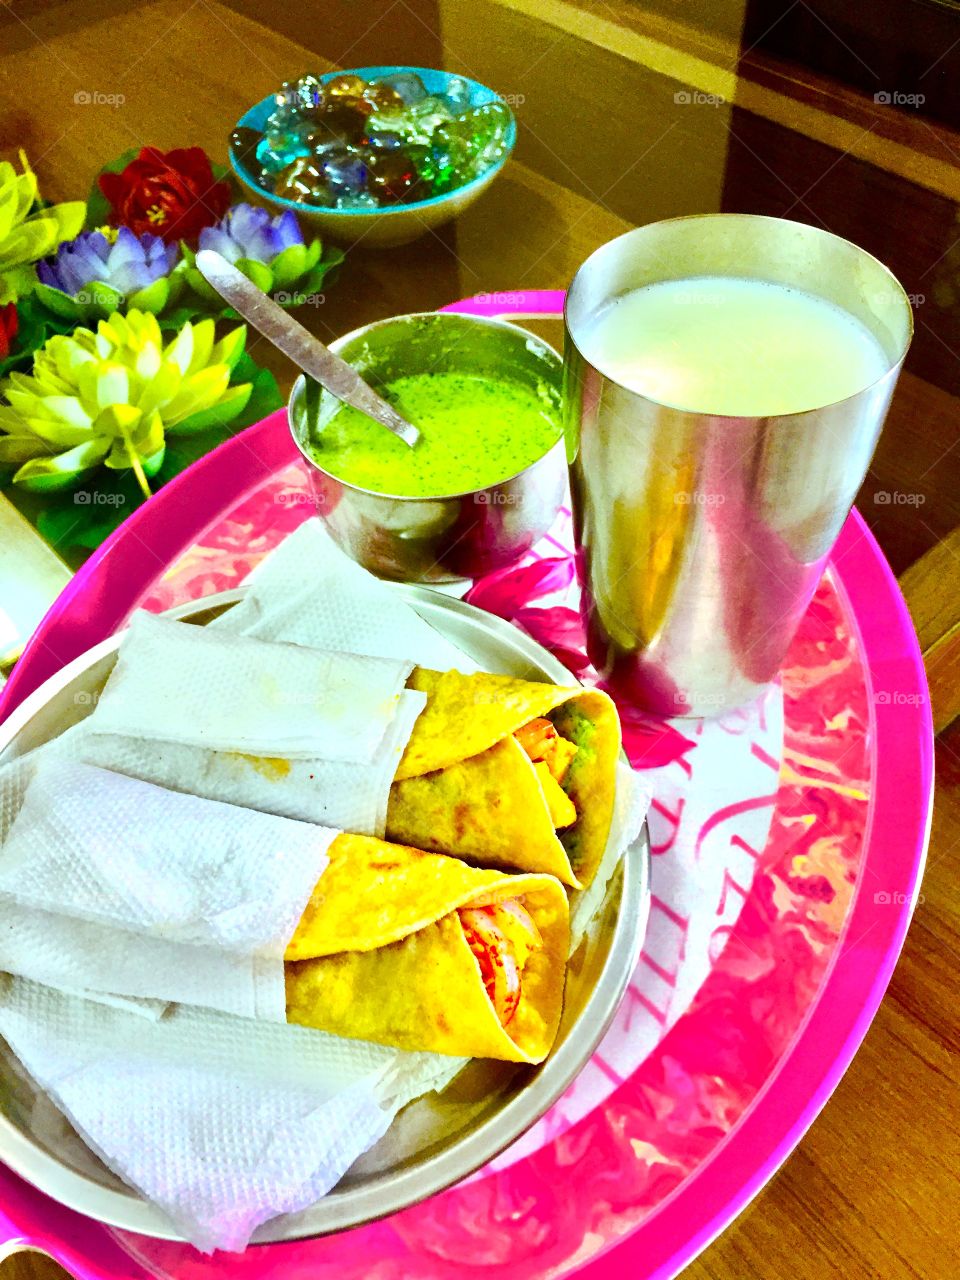 Delicious Kathi Rolls with milk and green chutney.